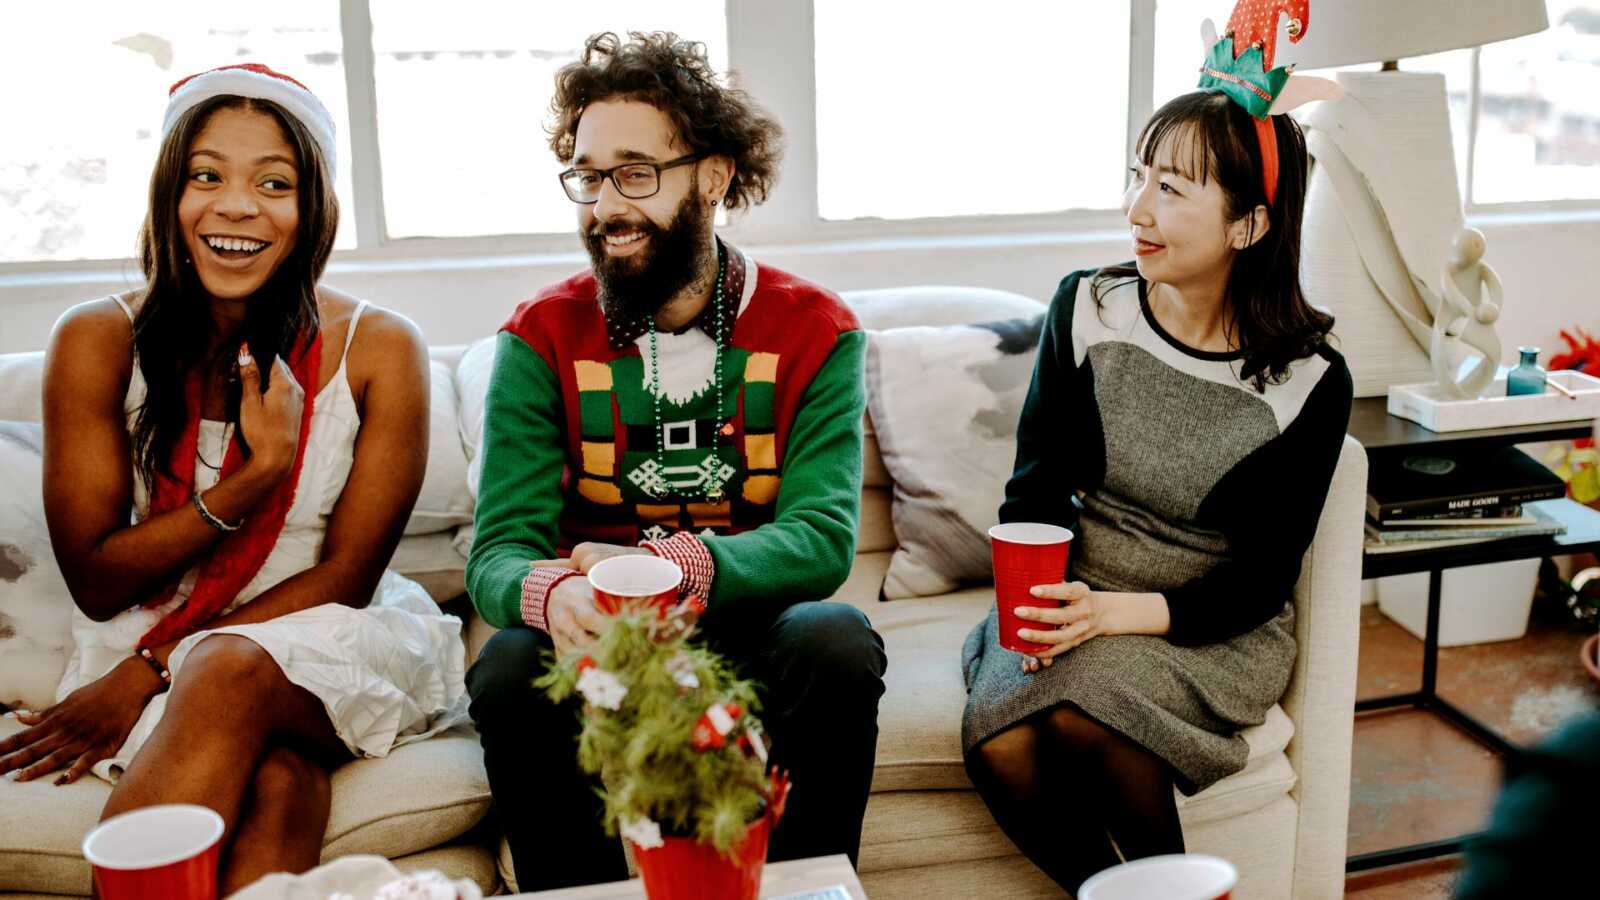 Friend gathered on couch in festive Christmas attire